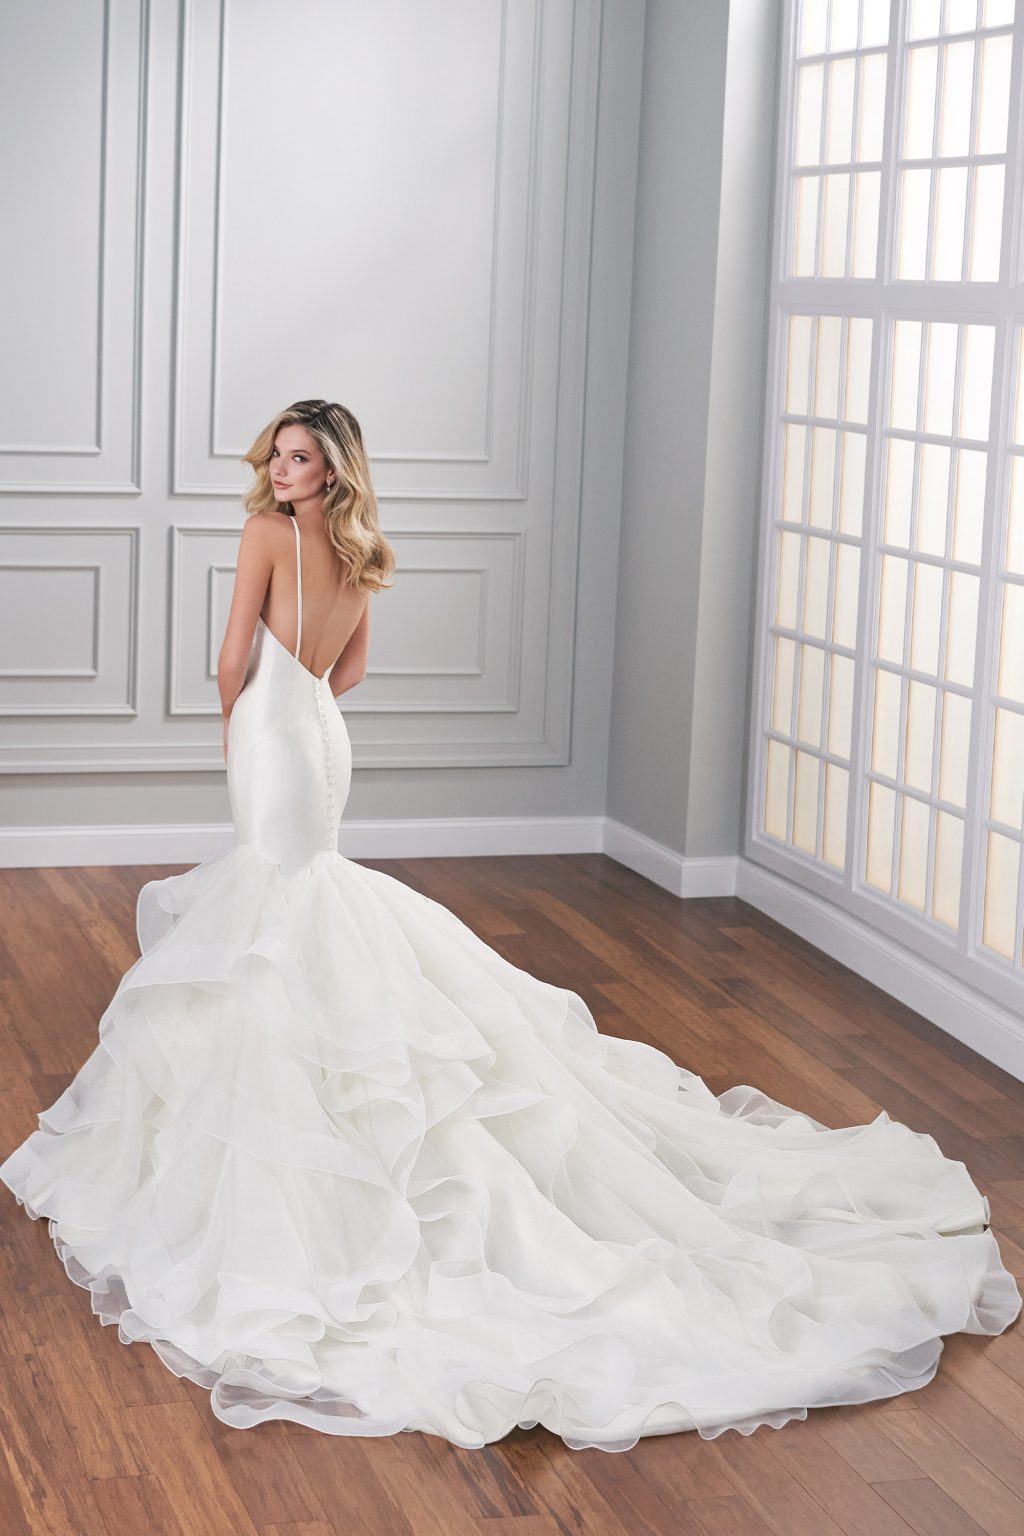 Which Wedding Dress Style Are You? - Wedding Journal